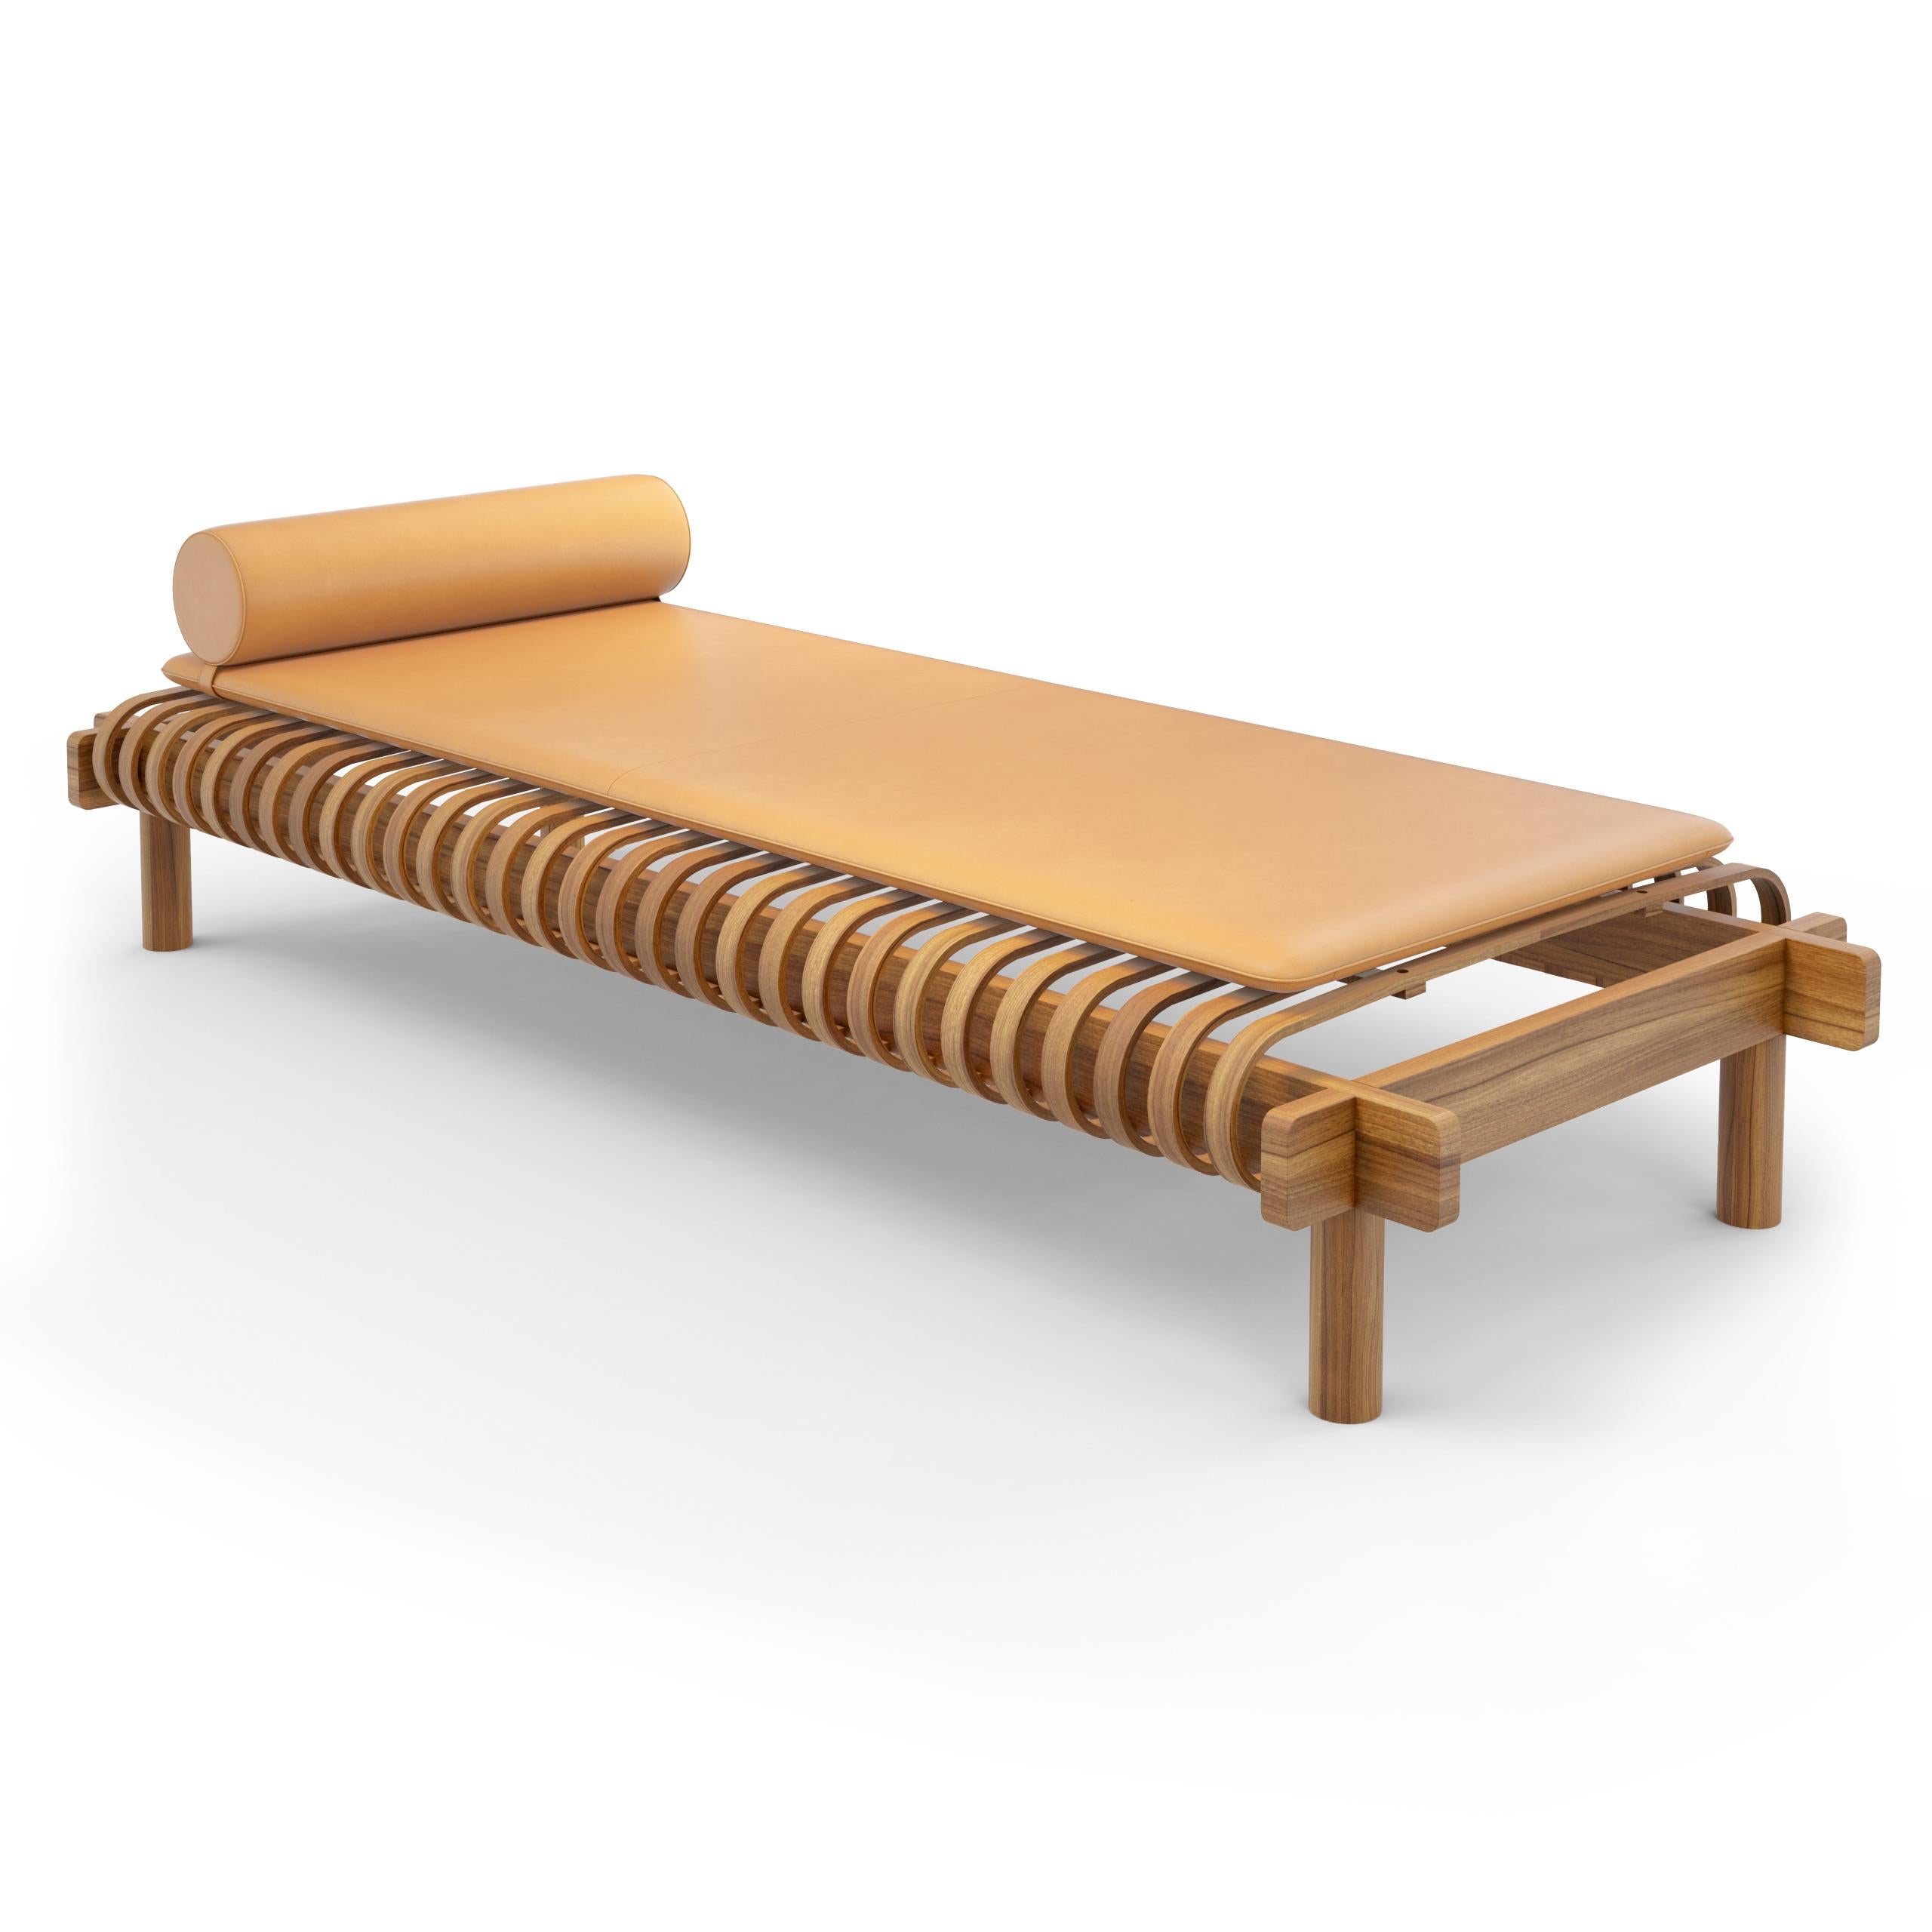 Mid-Century Modern Limited Edition Charlotte Perriand Tokyo Dormeuse by Cassina